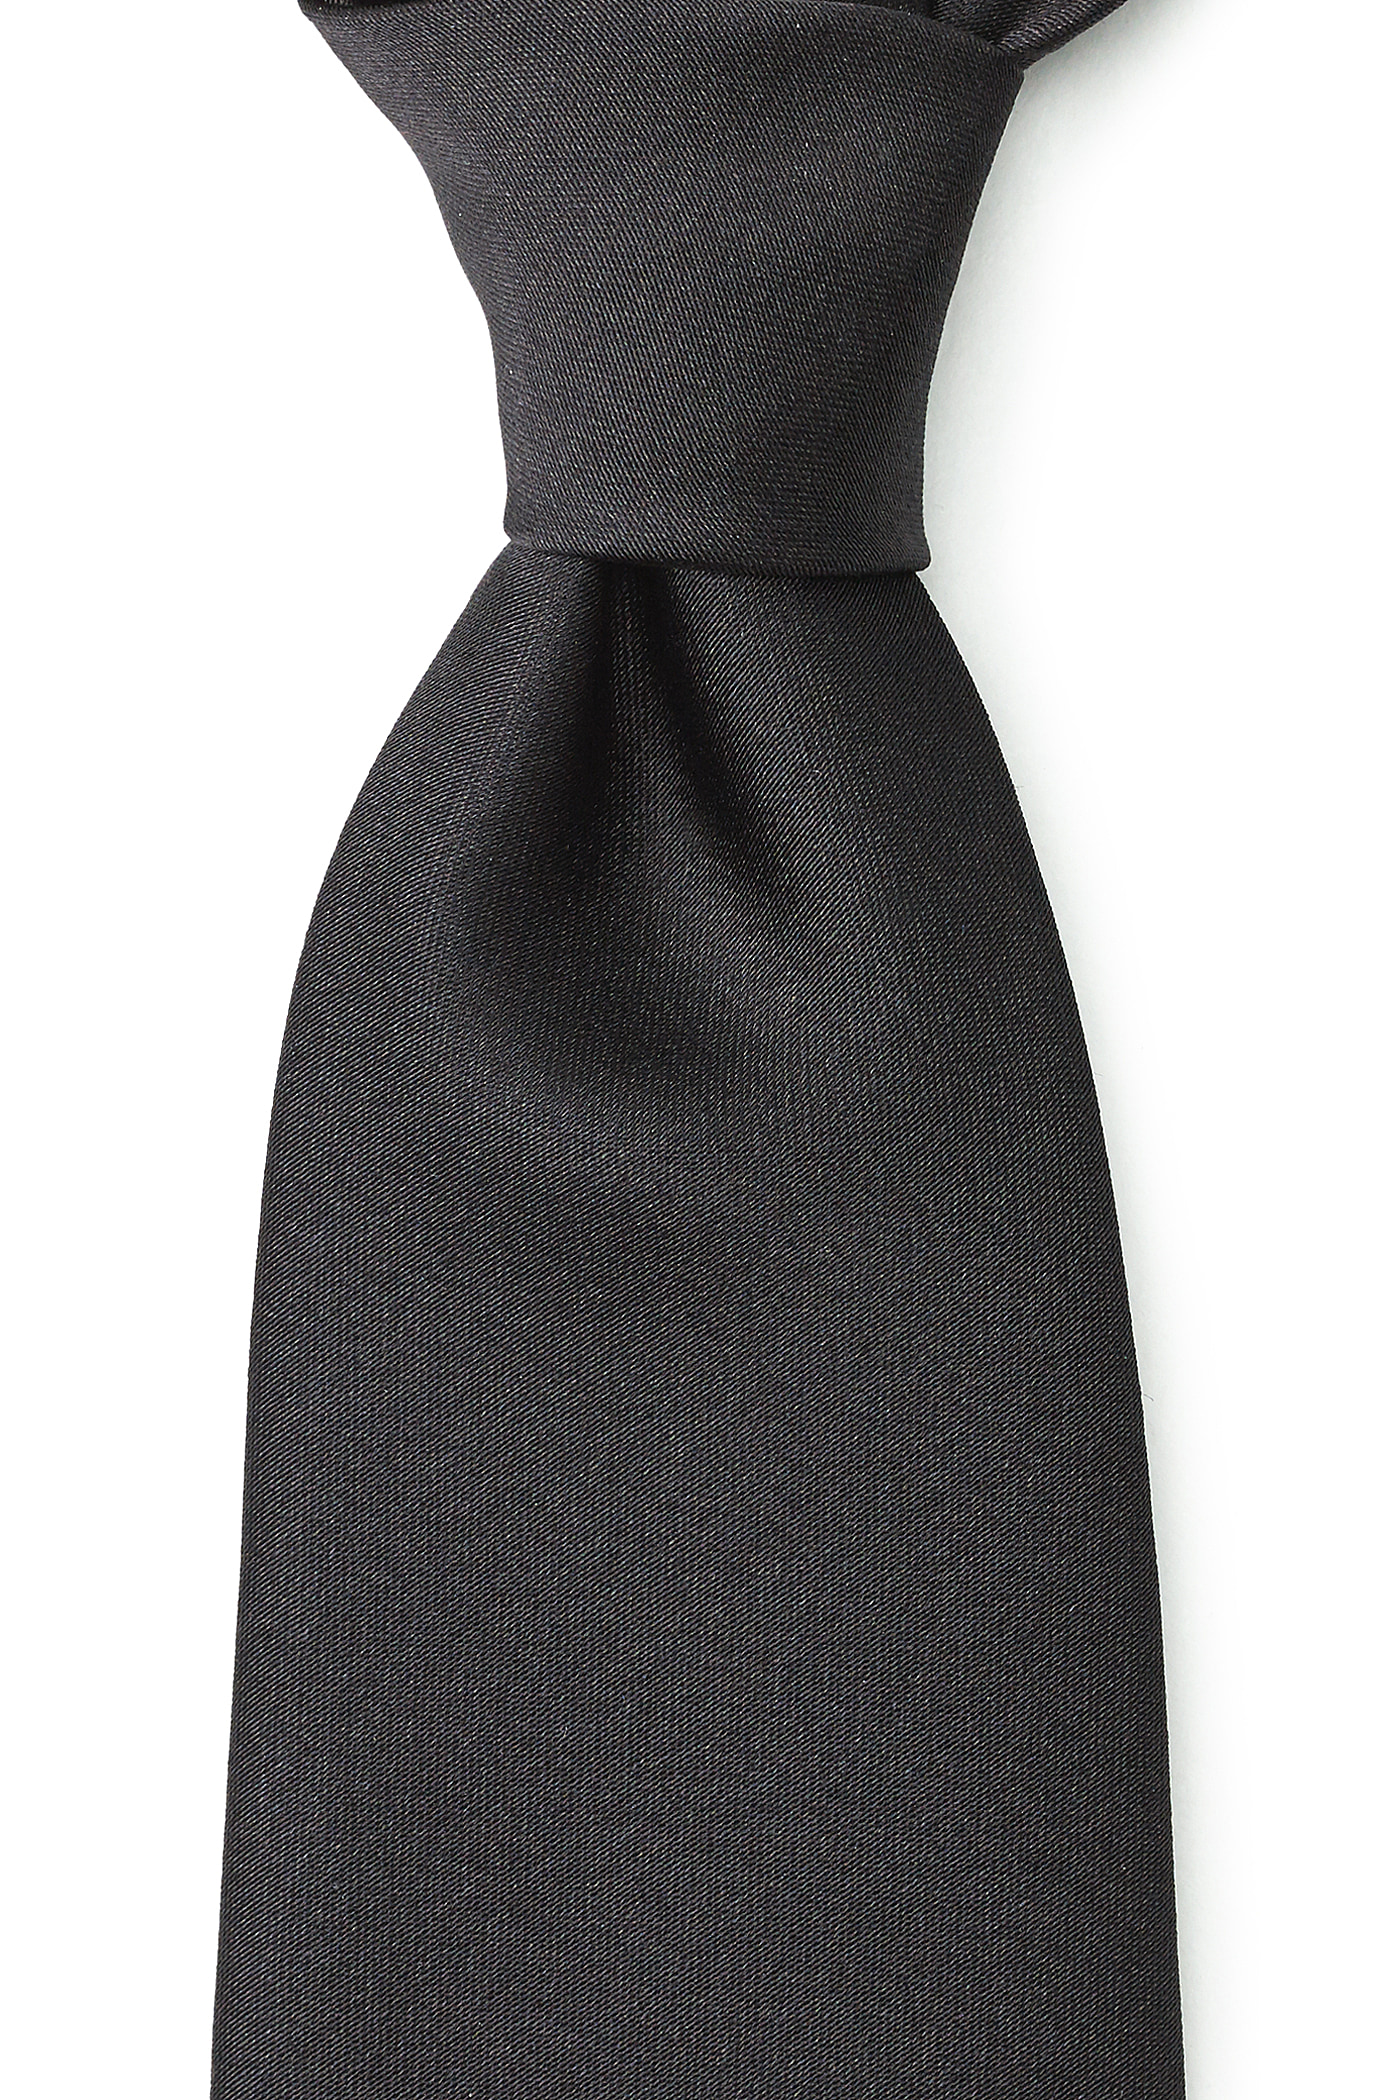 Black Classic Satin Tie New And Lingwood